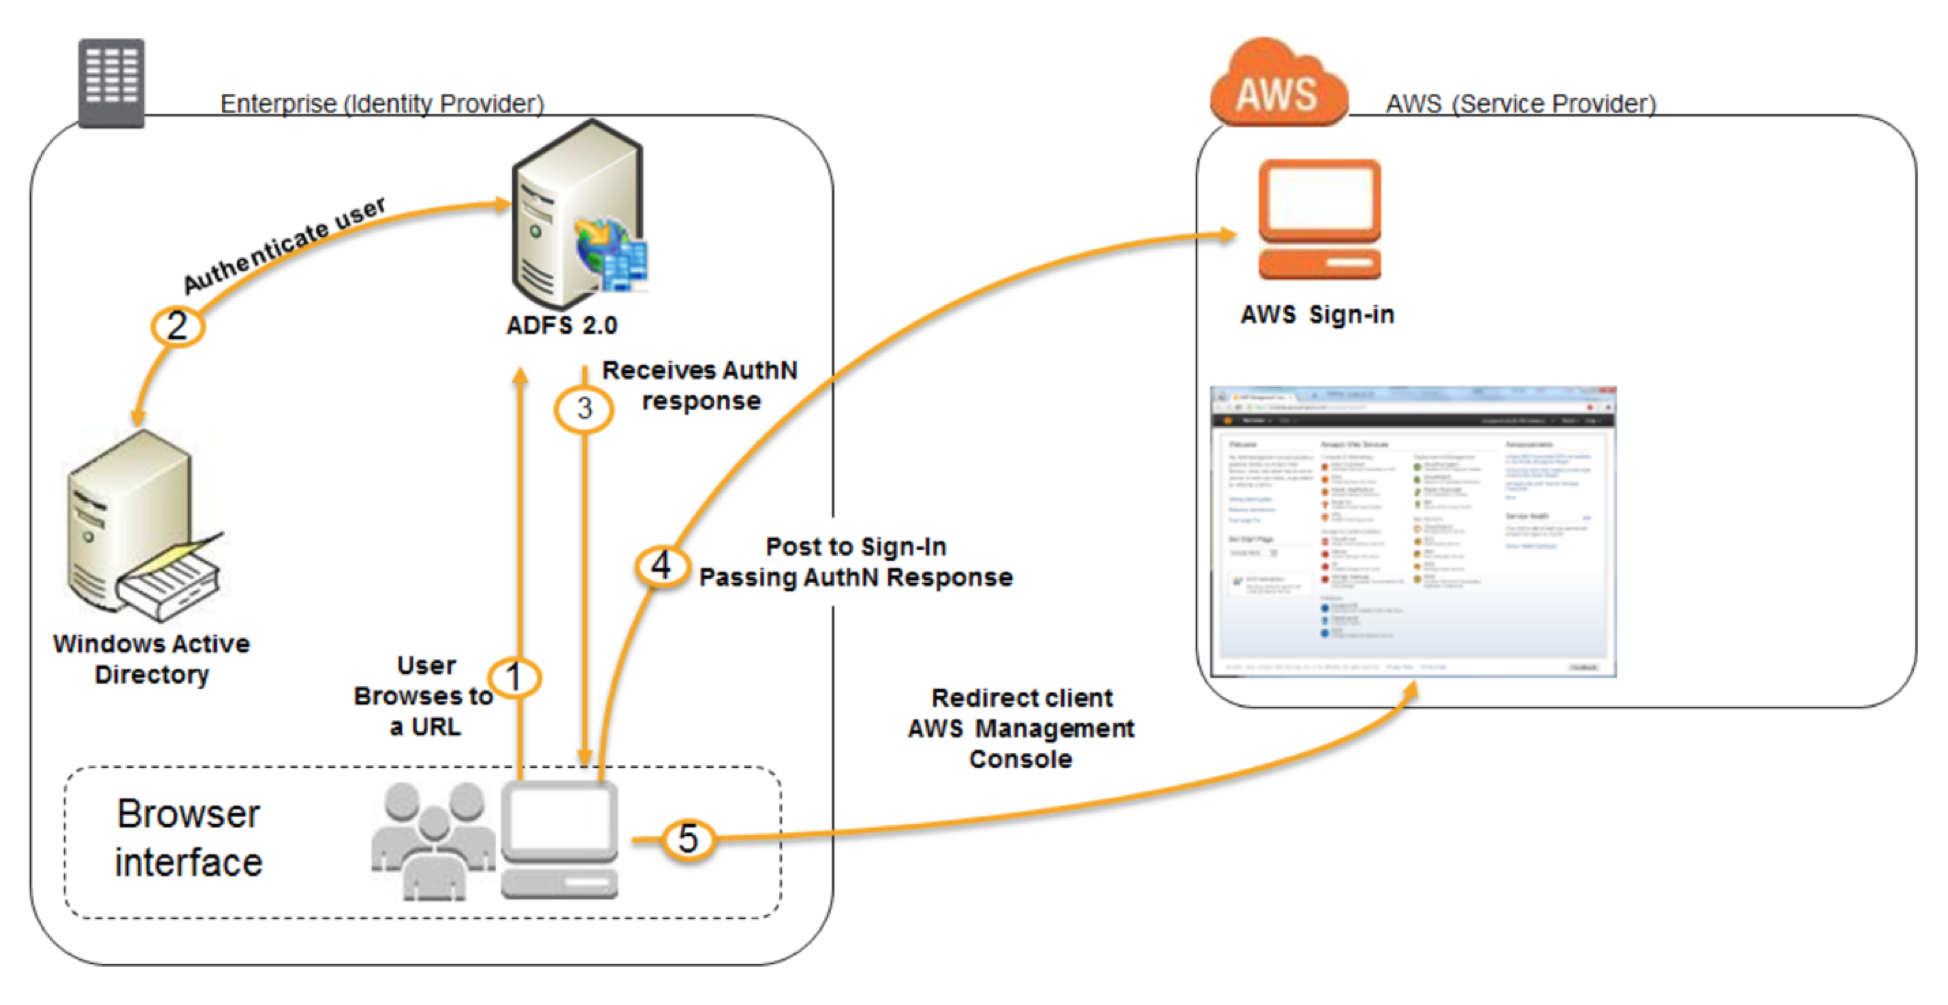 Aws certification : aws identity and access management (iam) - whizlabs blog